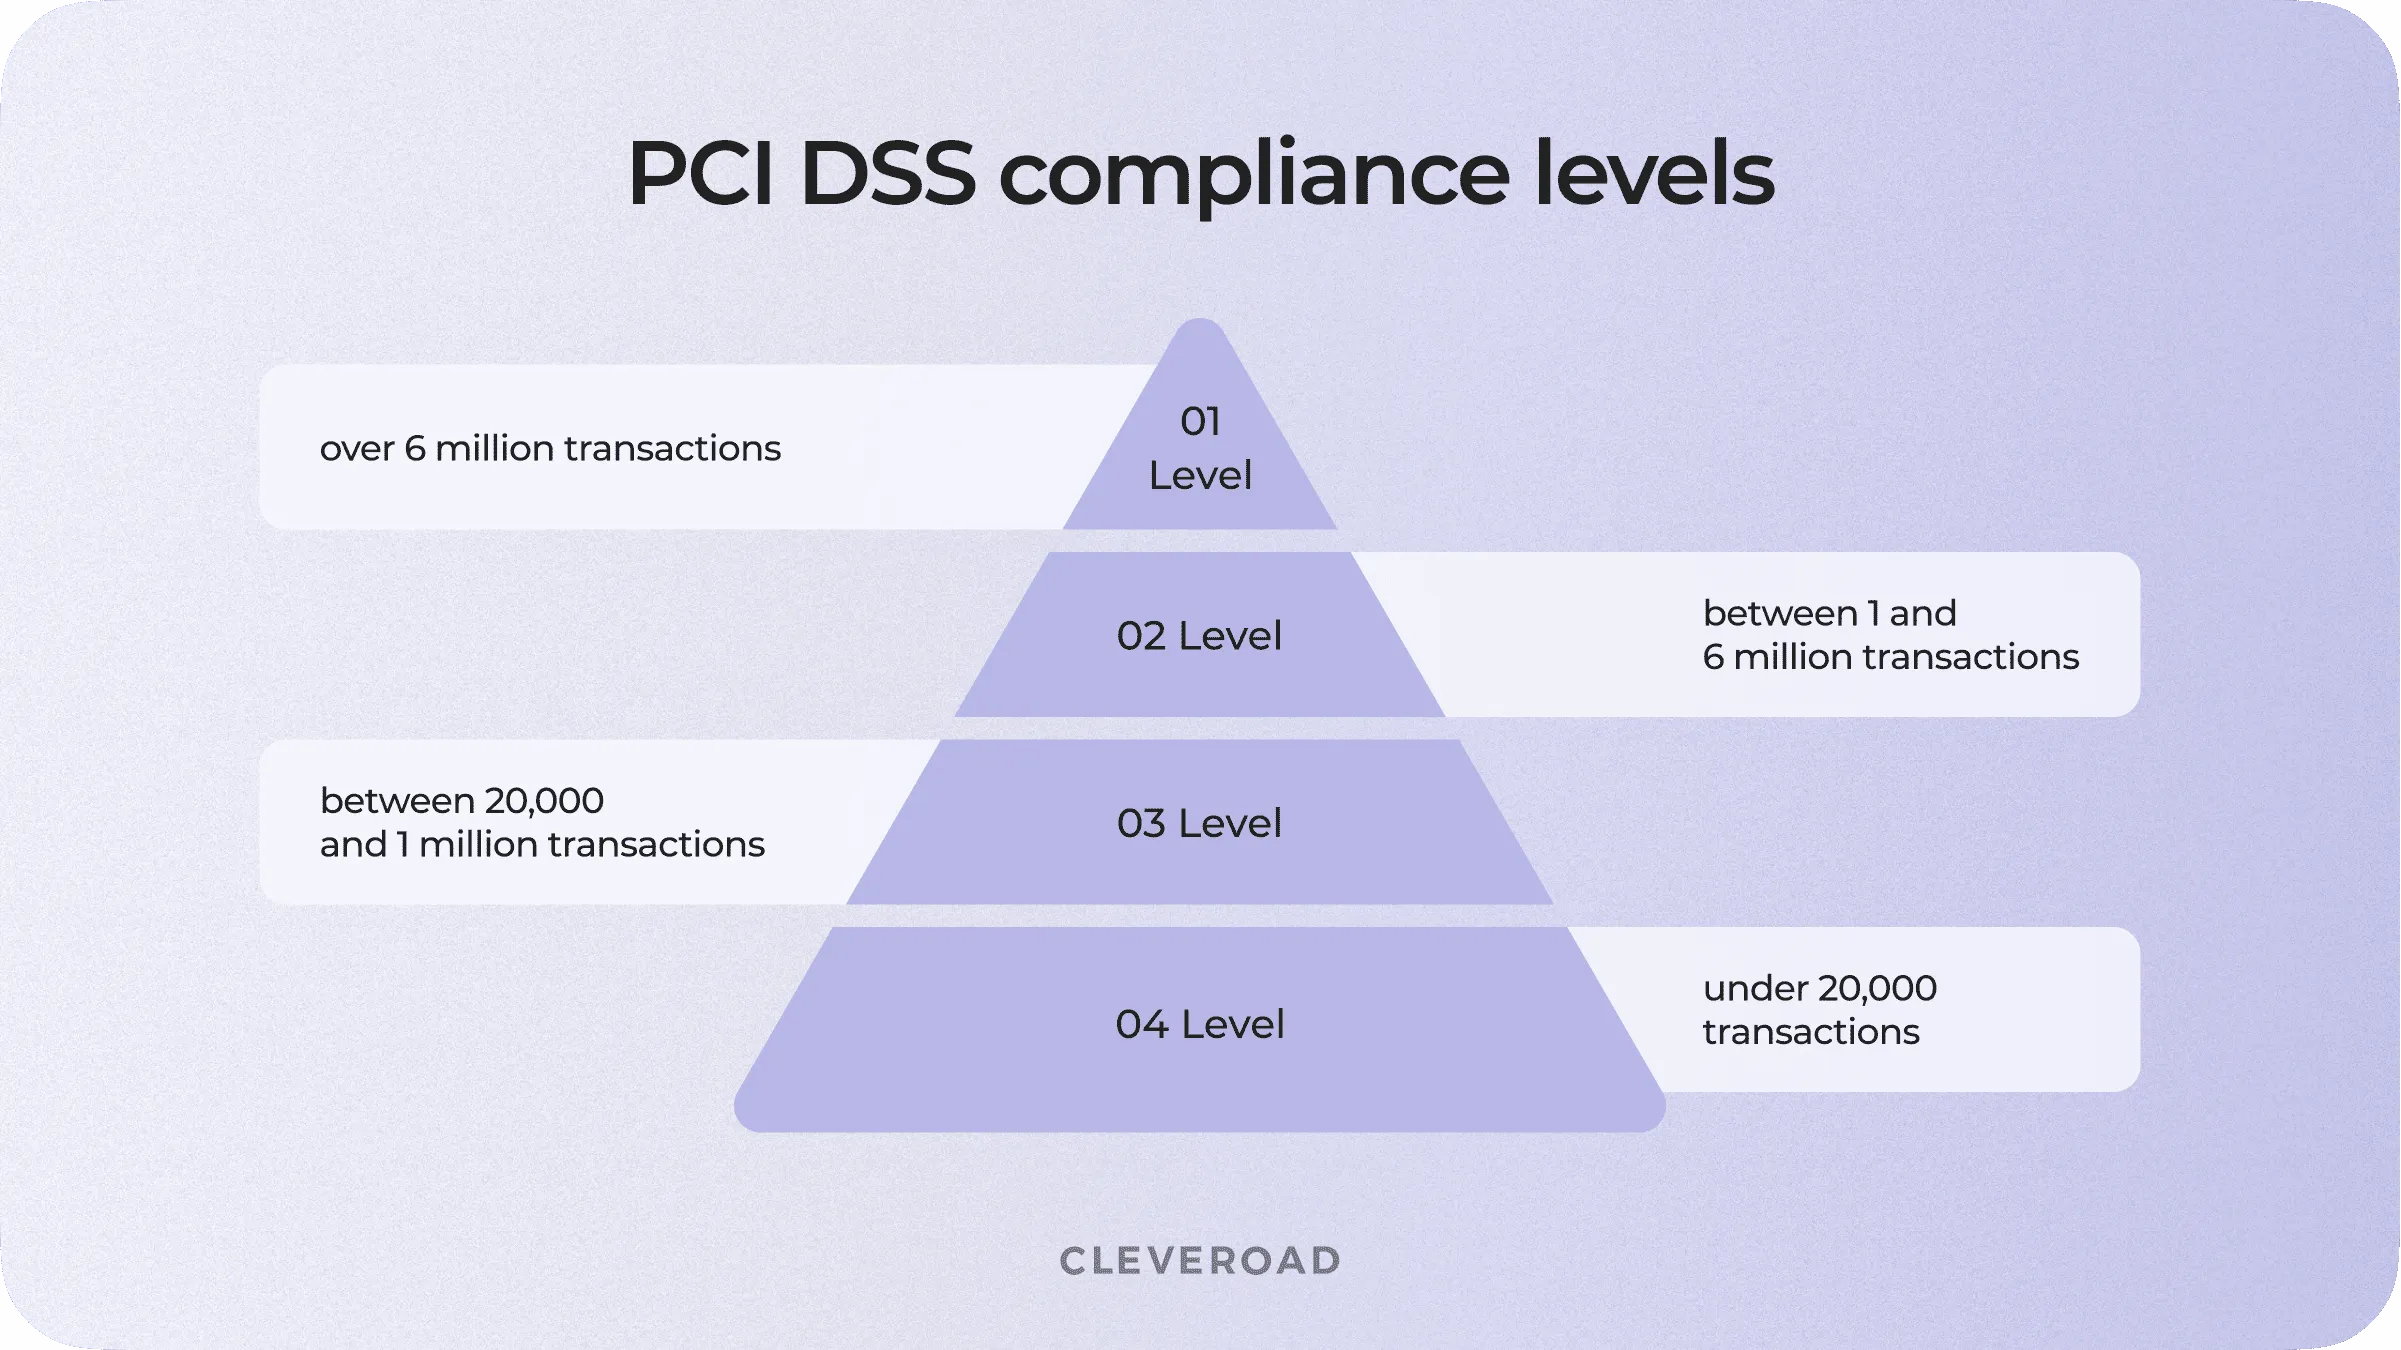 4 levels of PCI DSS compliance